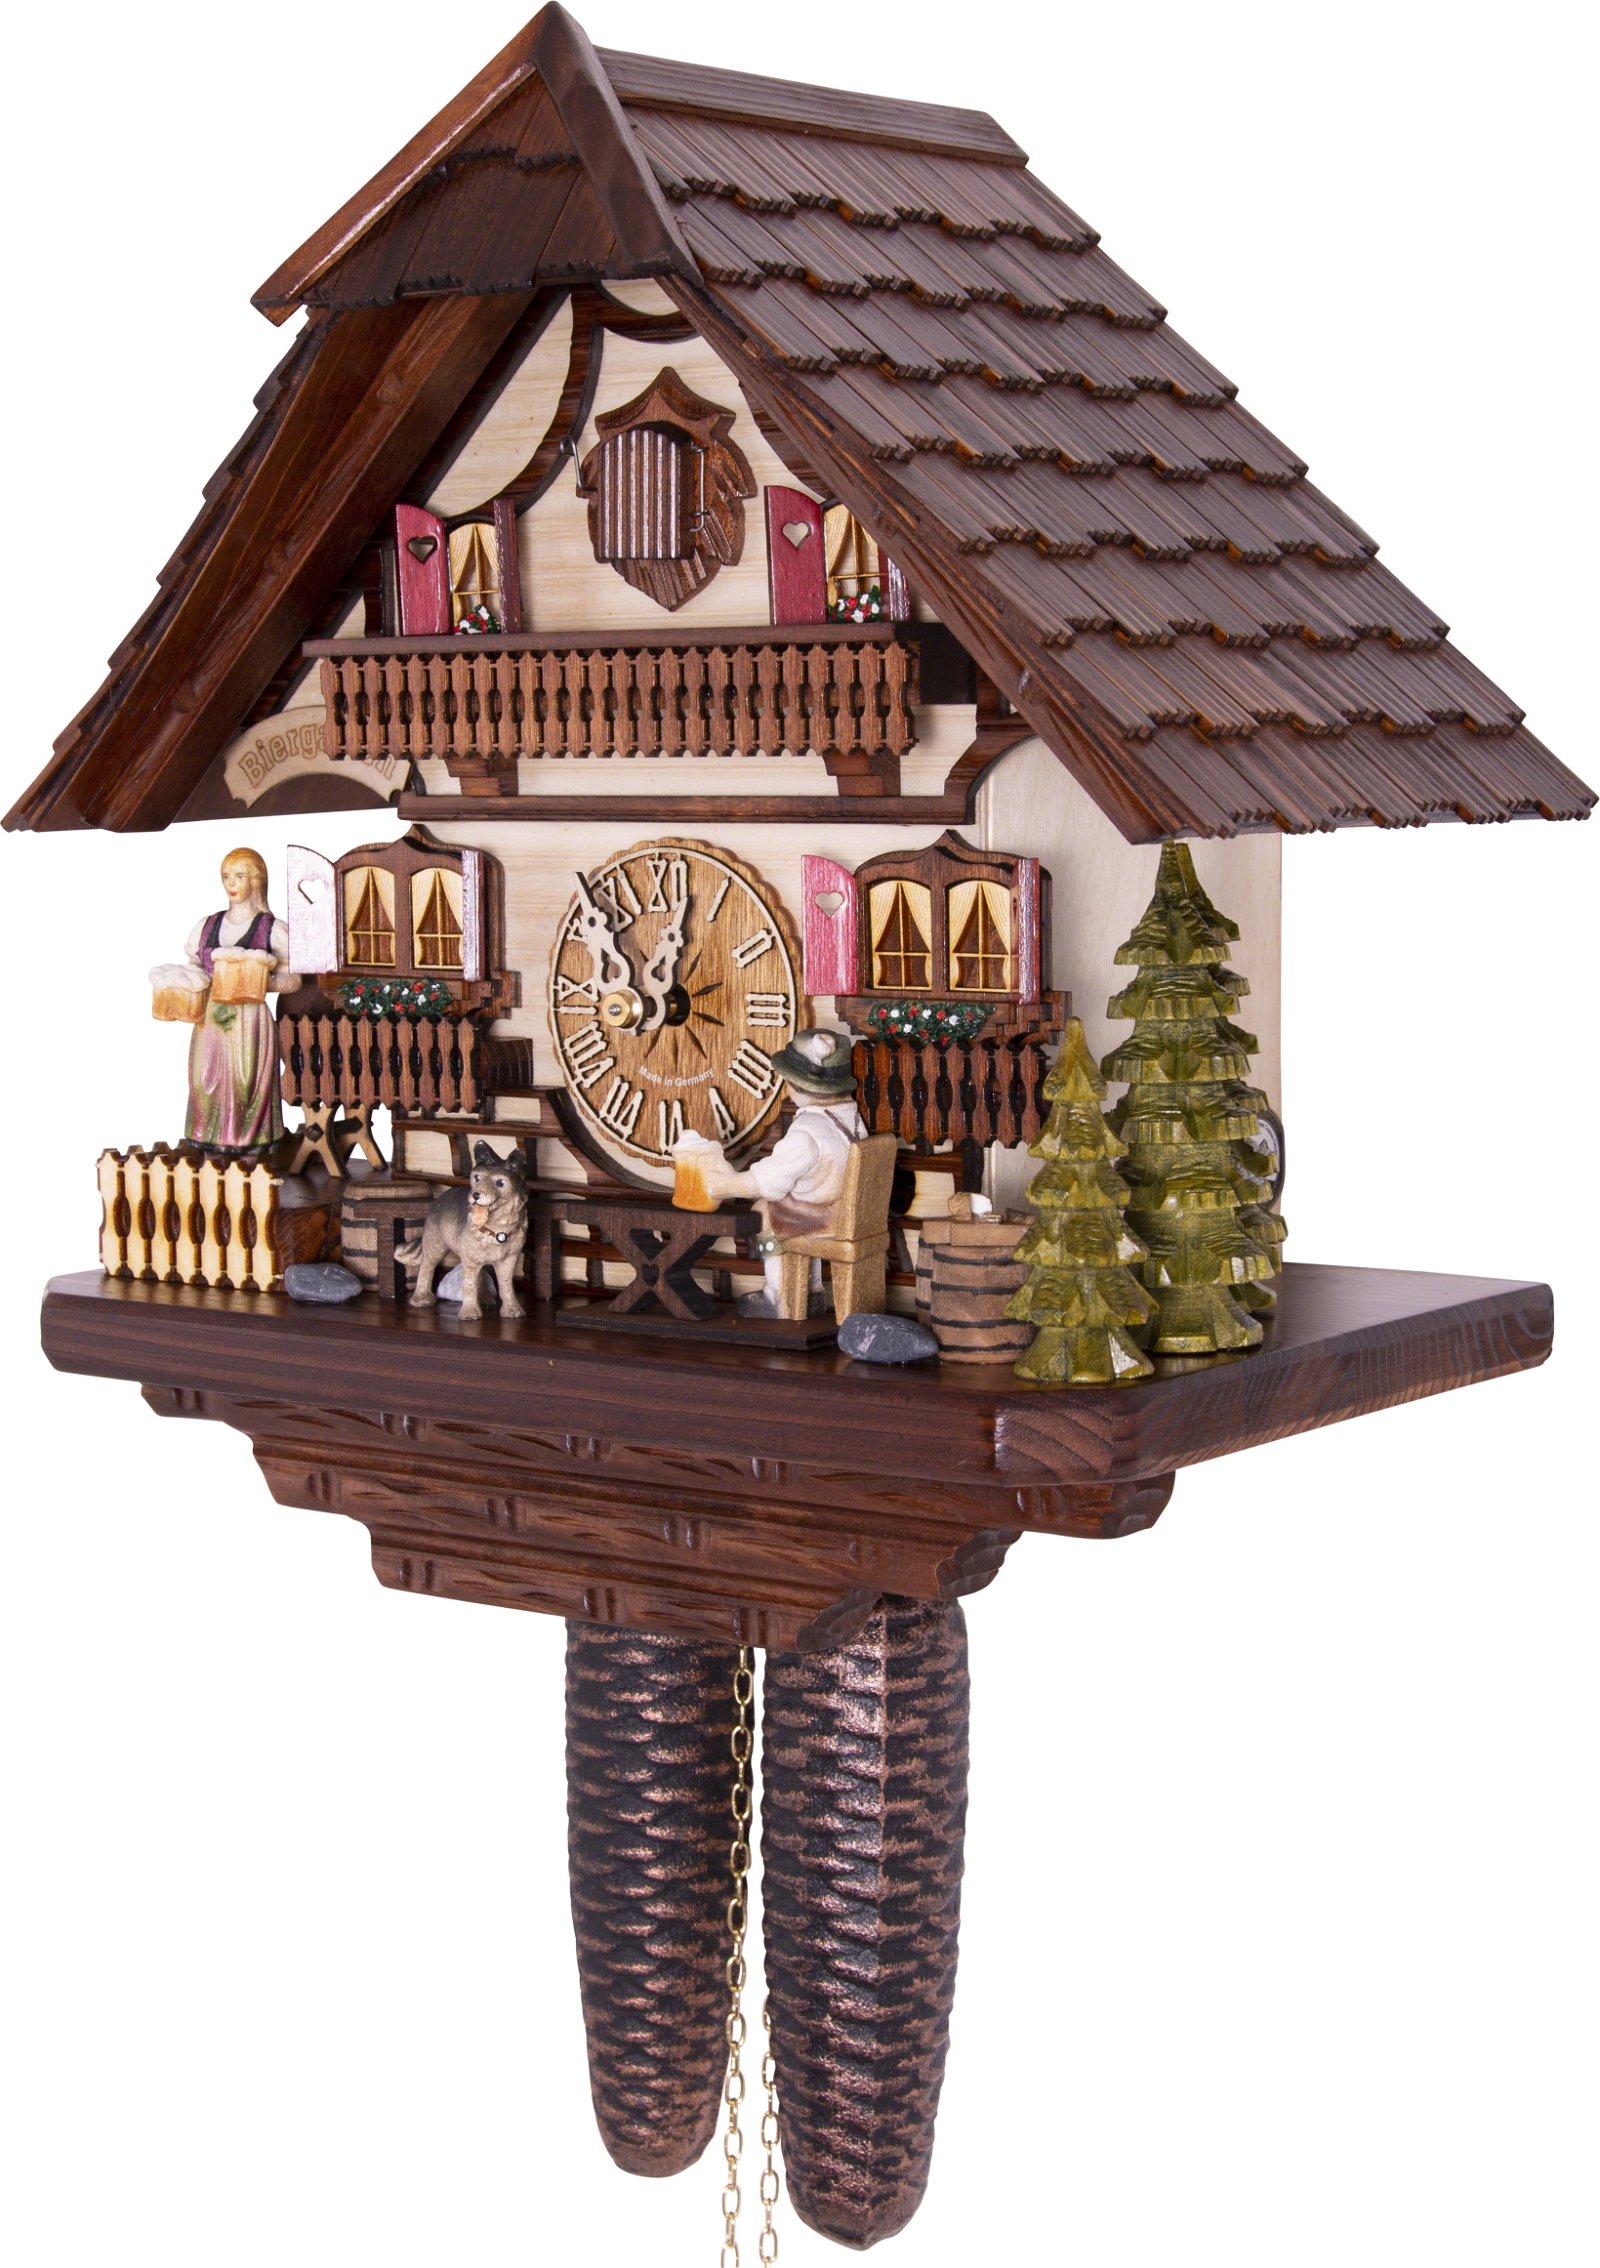 Cuckoo Clock Chalet Style 8 Day Movement 33cm by Hekas